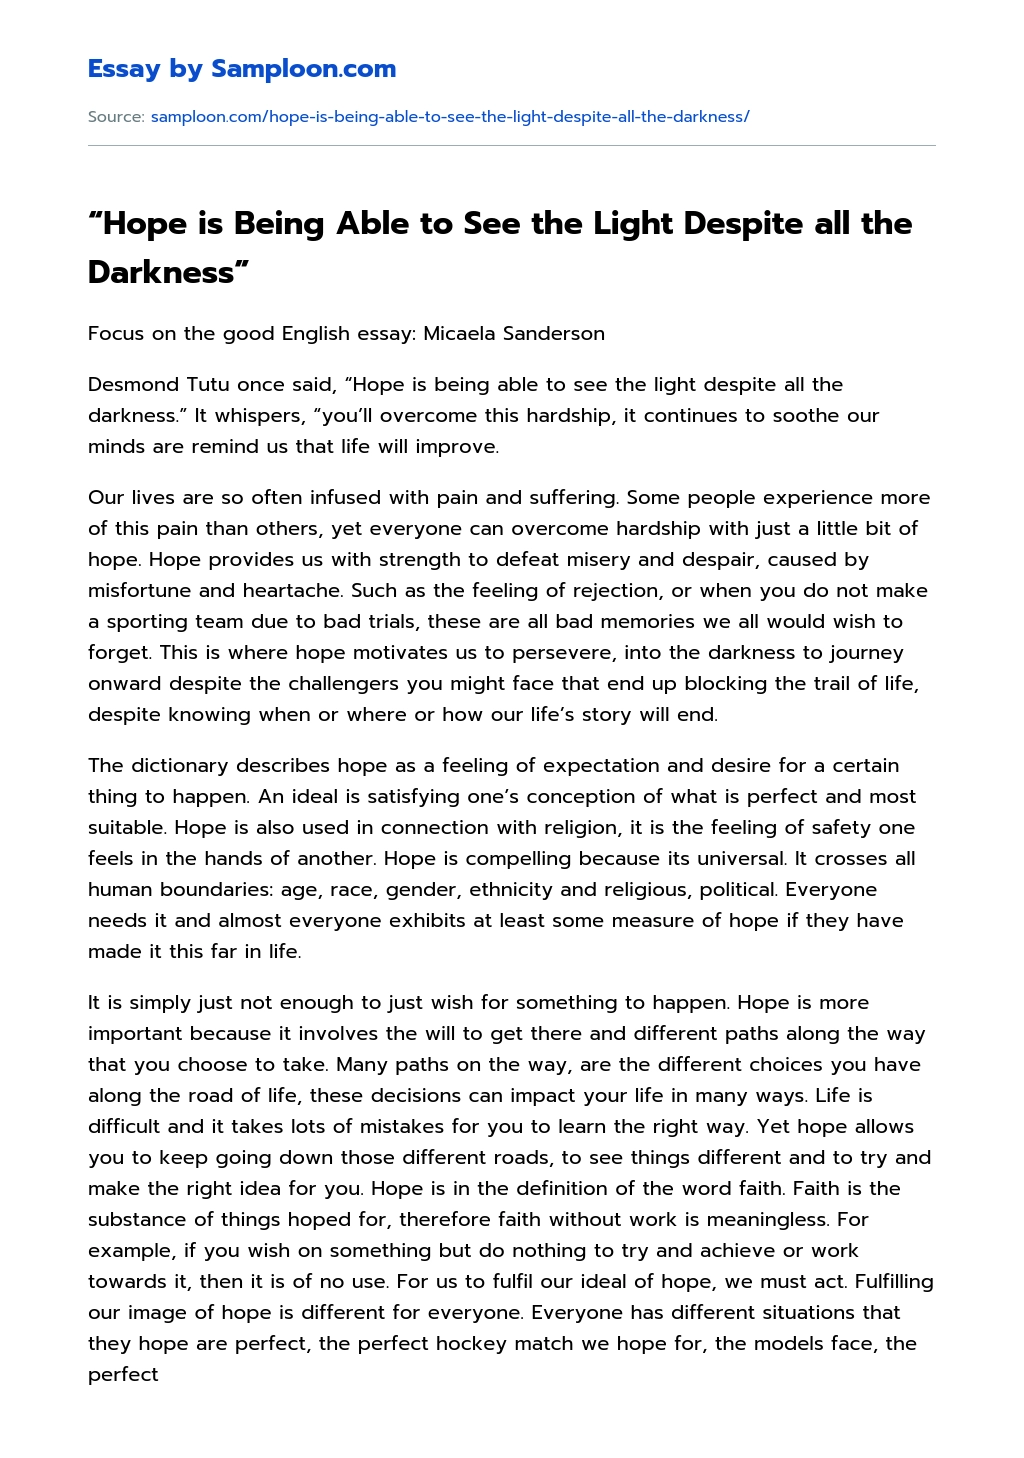 “Hope is Being Able to See the Light Despite all the Darkness” Argumentative Essay essay